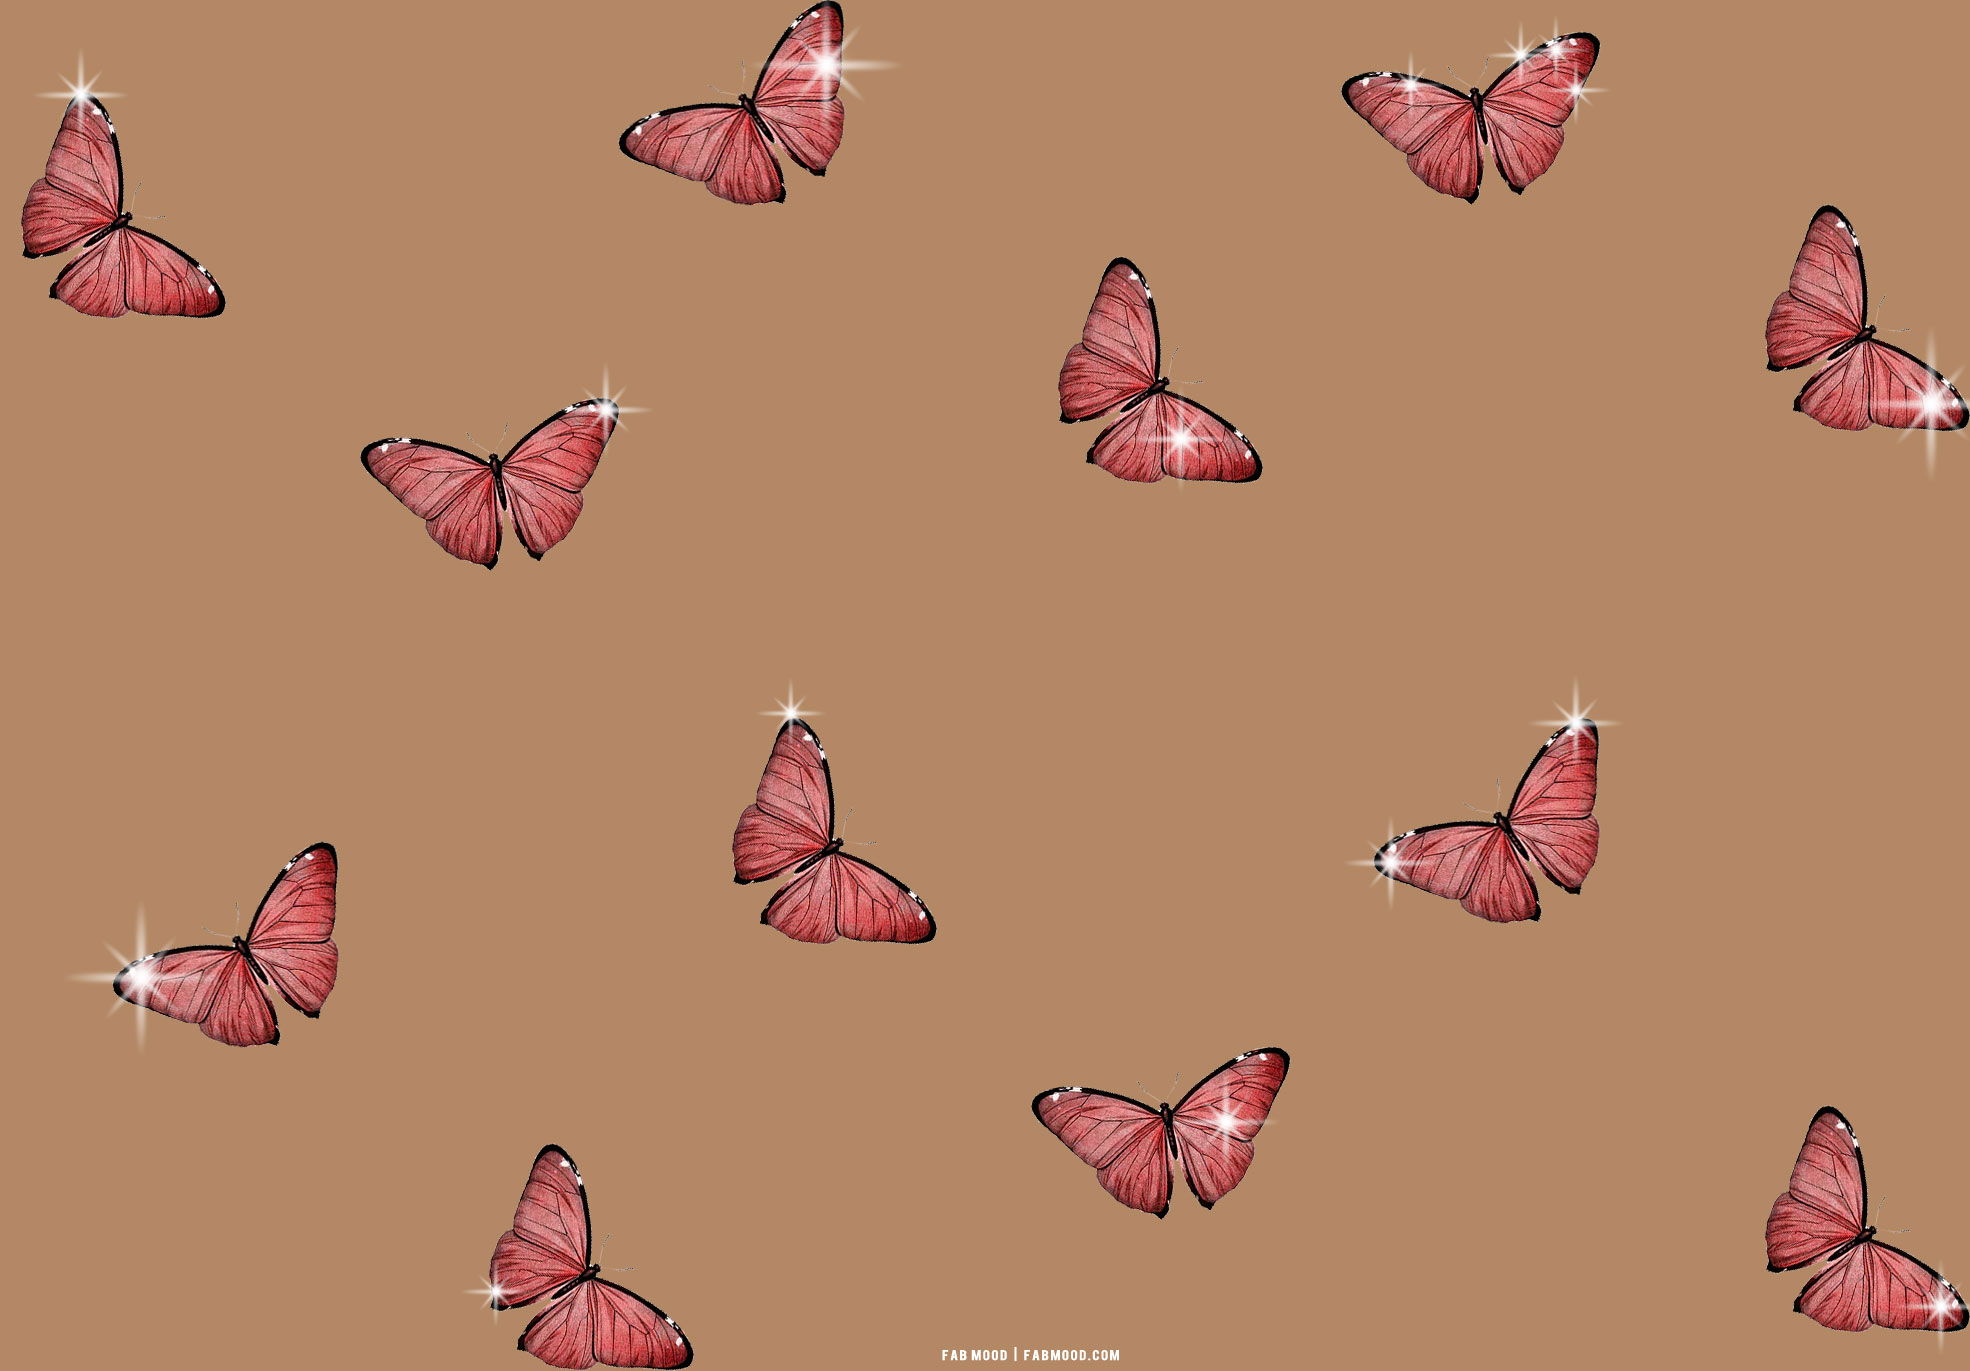 Interior Cool Light Brown Natural Patterned Butterfly Wallpaper As Wall  Decoration For Home Interior Design Wonderful Design Ideas For Butterfly  Wallpaper For Home Wall Decoration For Home  फट शयर